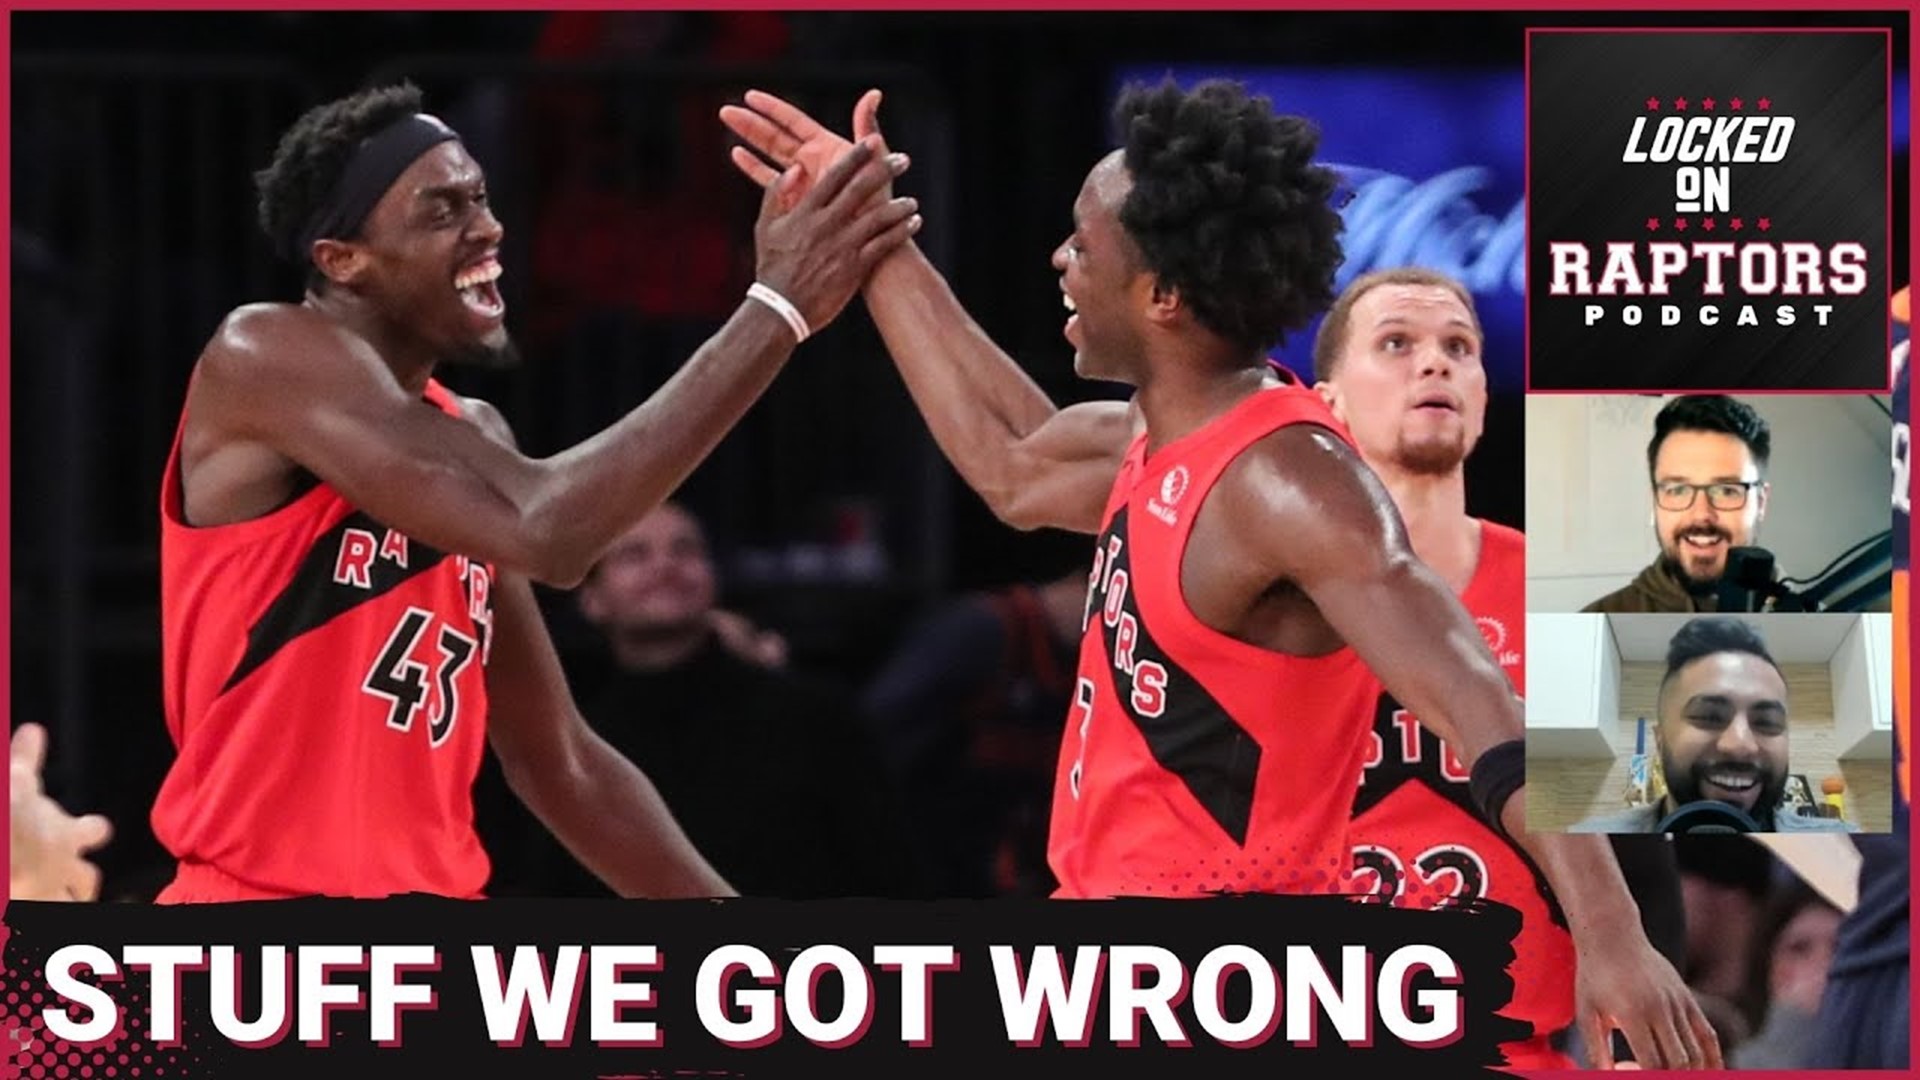 In Episode 1620, Sean Woodley is joined by Vivek Jacob (Sportsnet, Raptors in 7) to eat some crow and perform some mea culpas